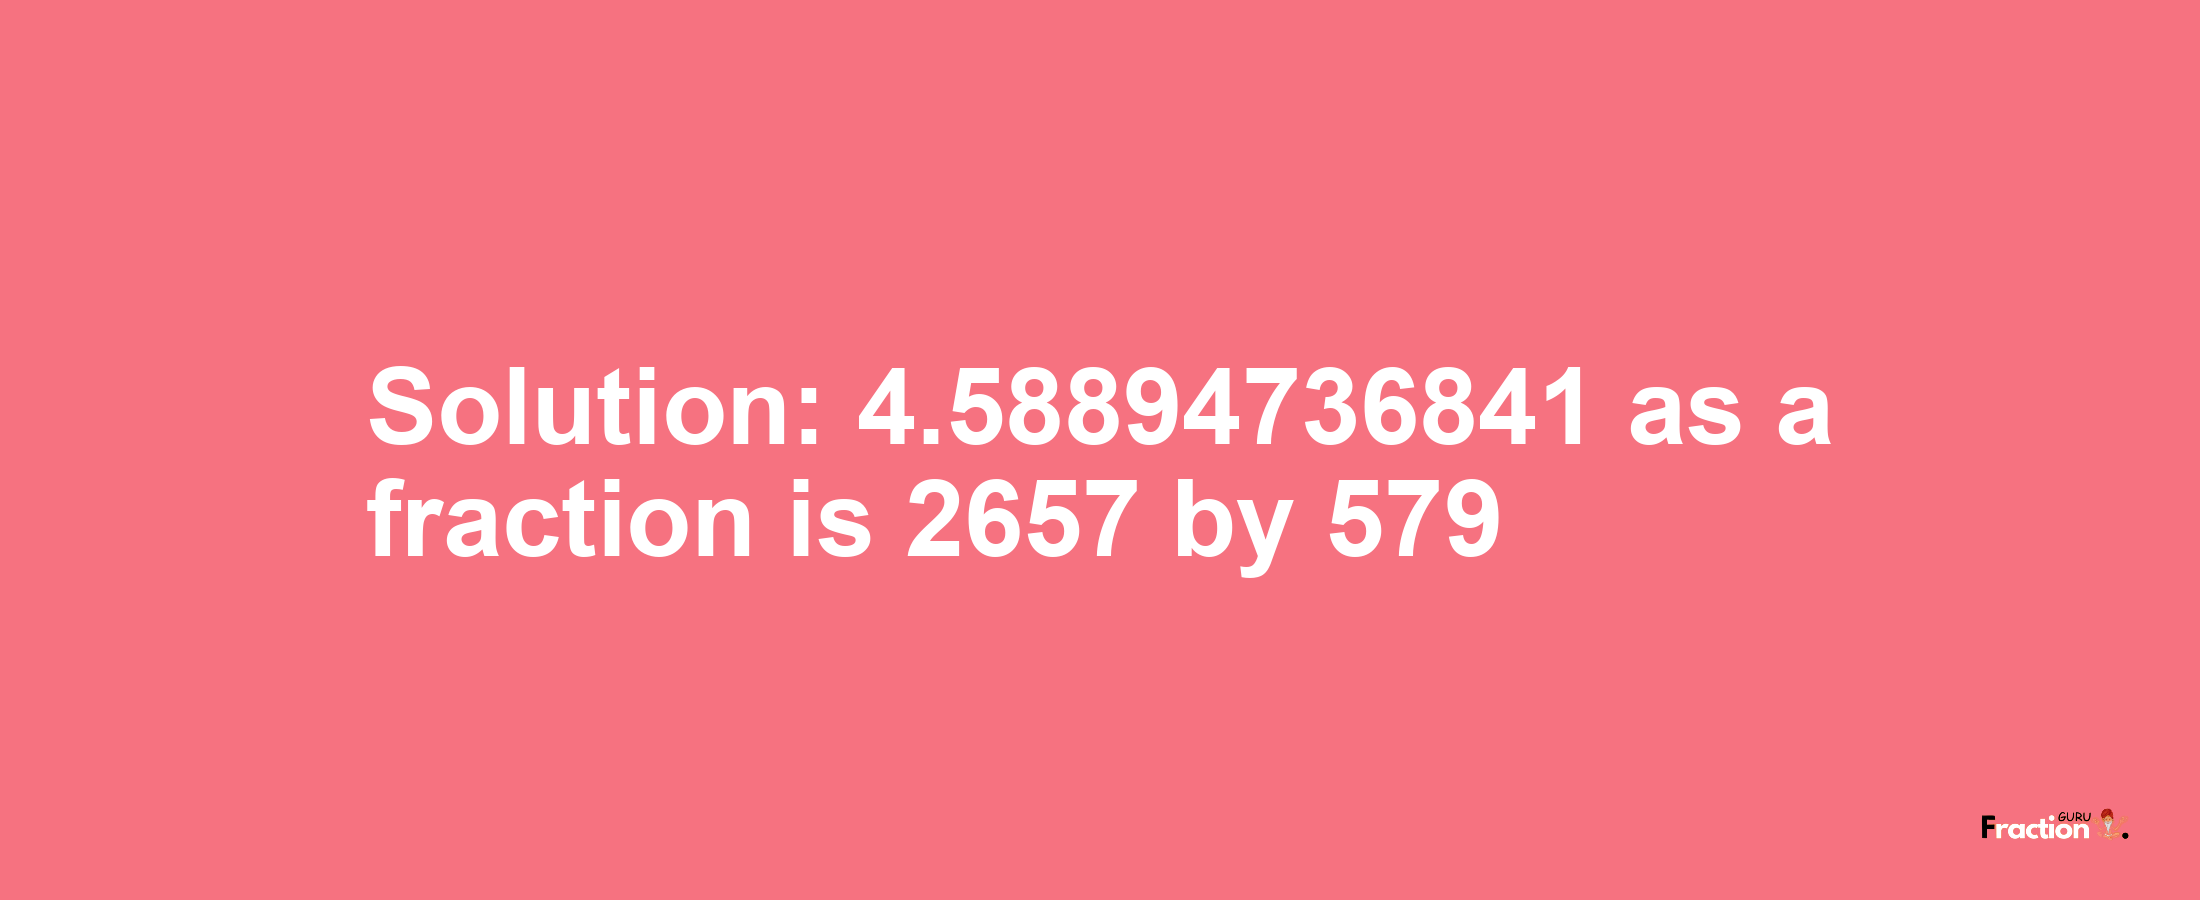 Solution:4.58894736841 as a fraction is 2657/579